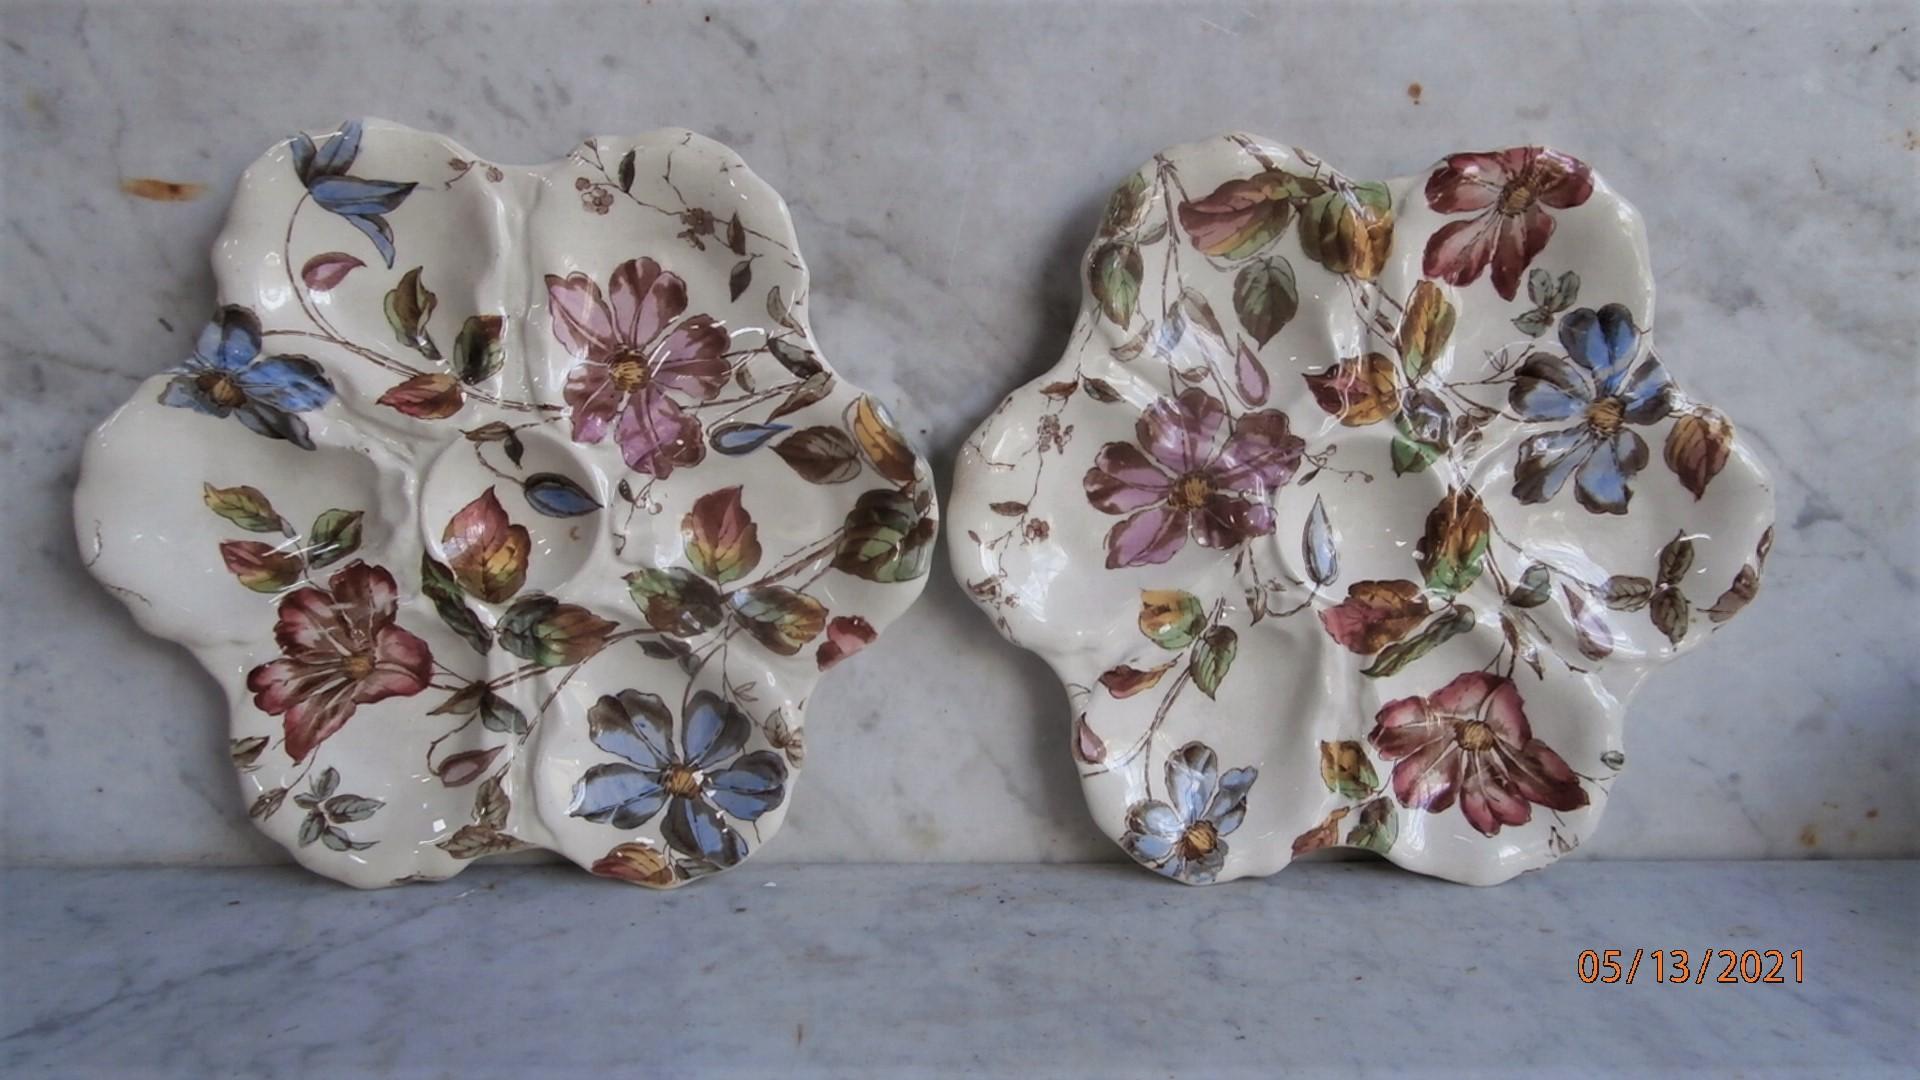 Aesthetic Movement 19th Century English Oyster Plate with Flowers Adderley